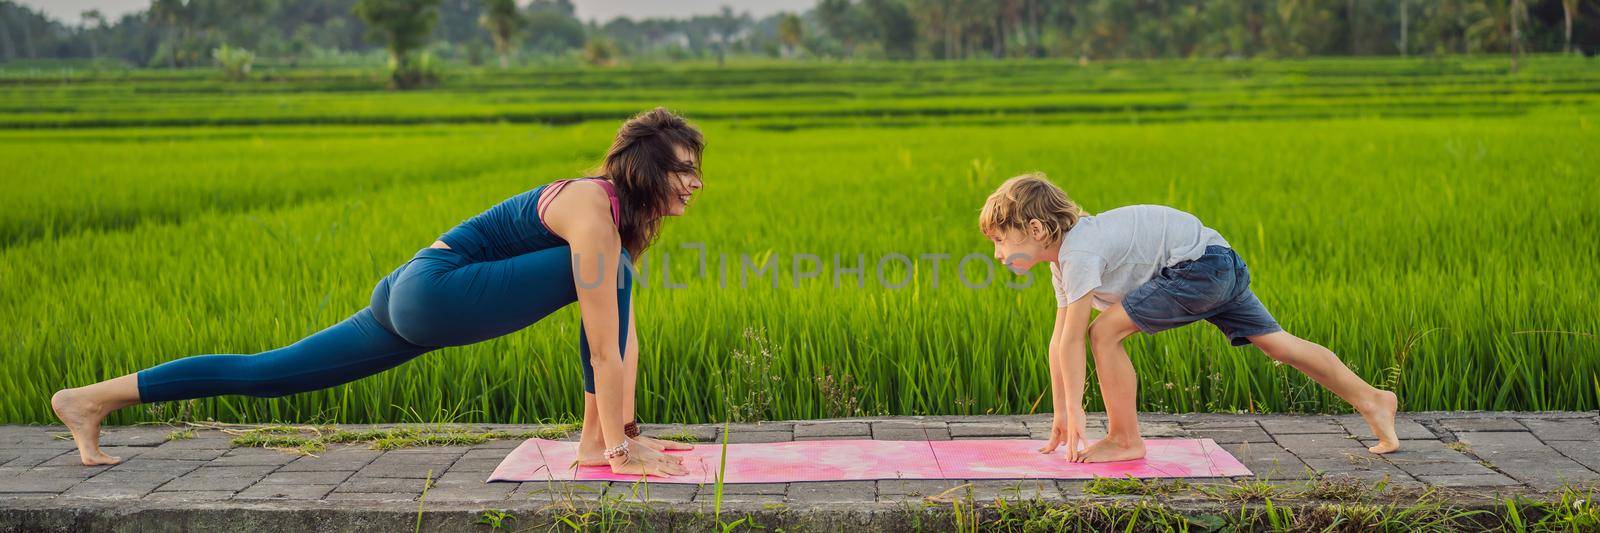 Boy and his yoga teacher doing yoga in a rice field BANNER, LONG FORMAT by galitskaya